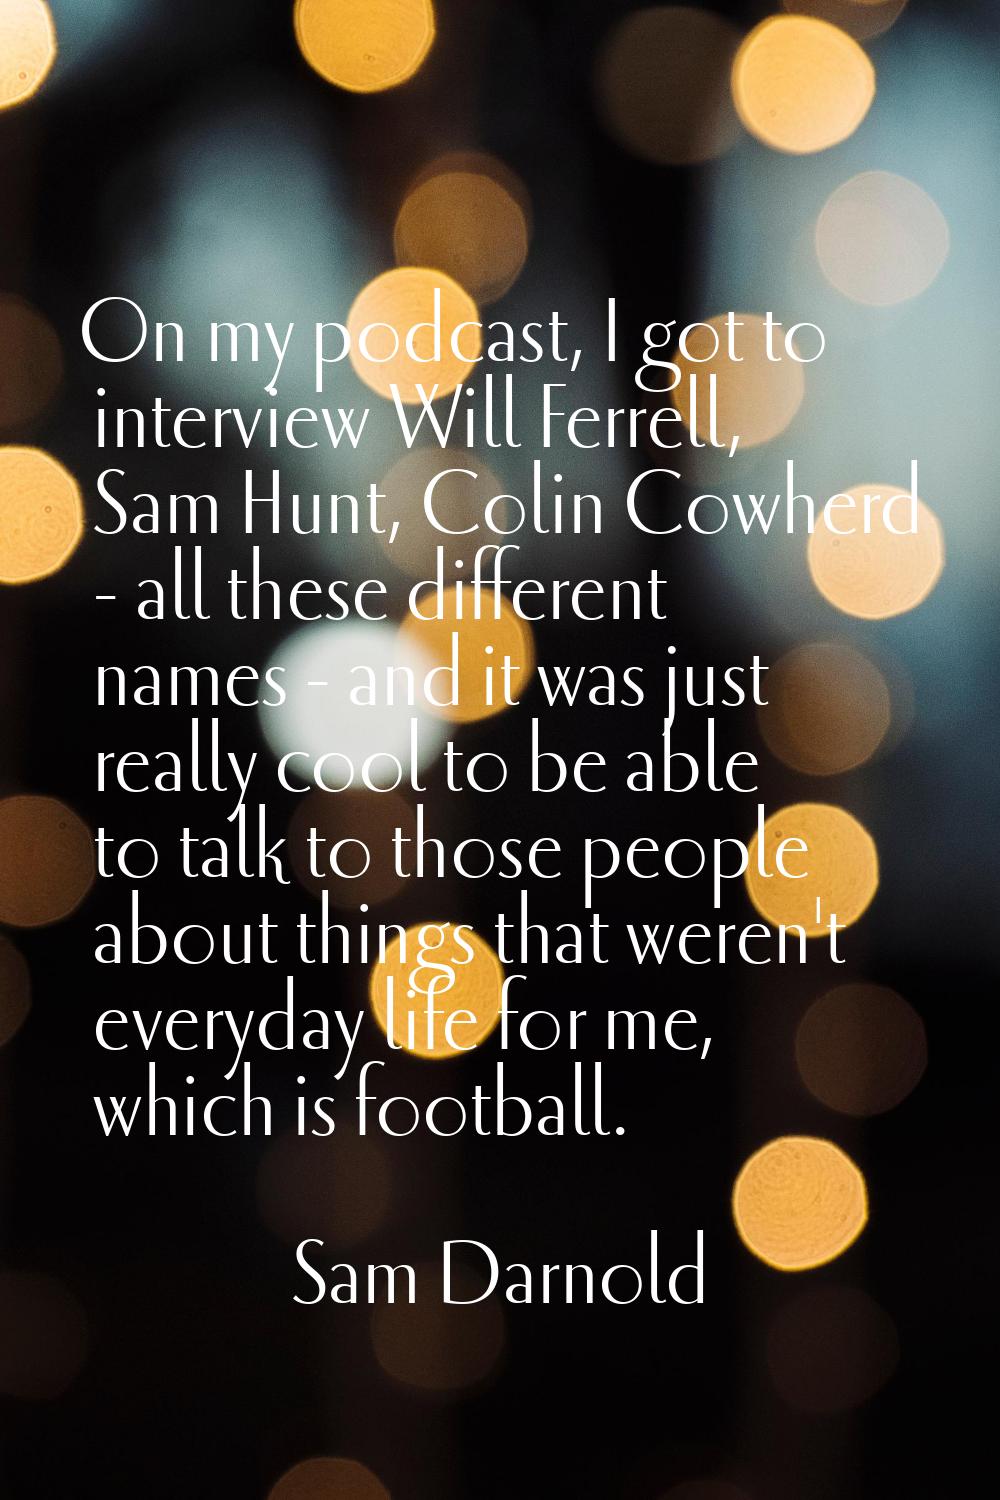 On my podcast, I got to interview Will Ferrell, Sam Hunt, Colin Cowherd - all these different names